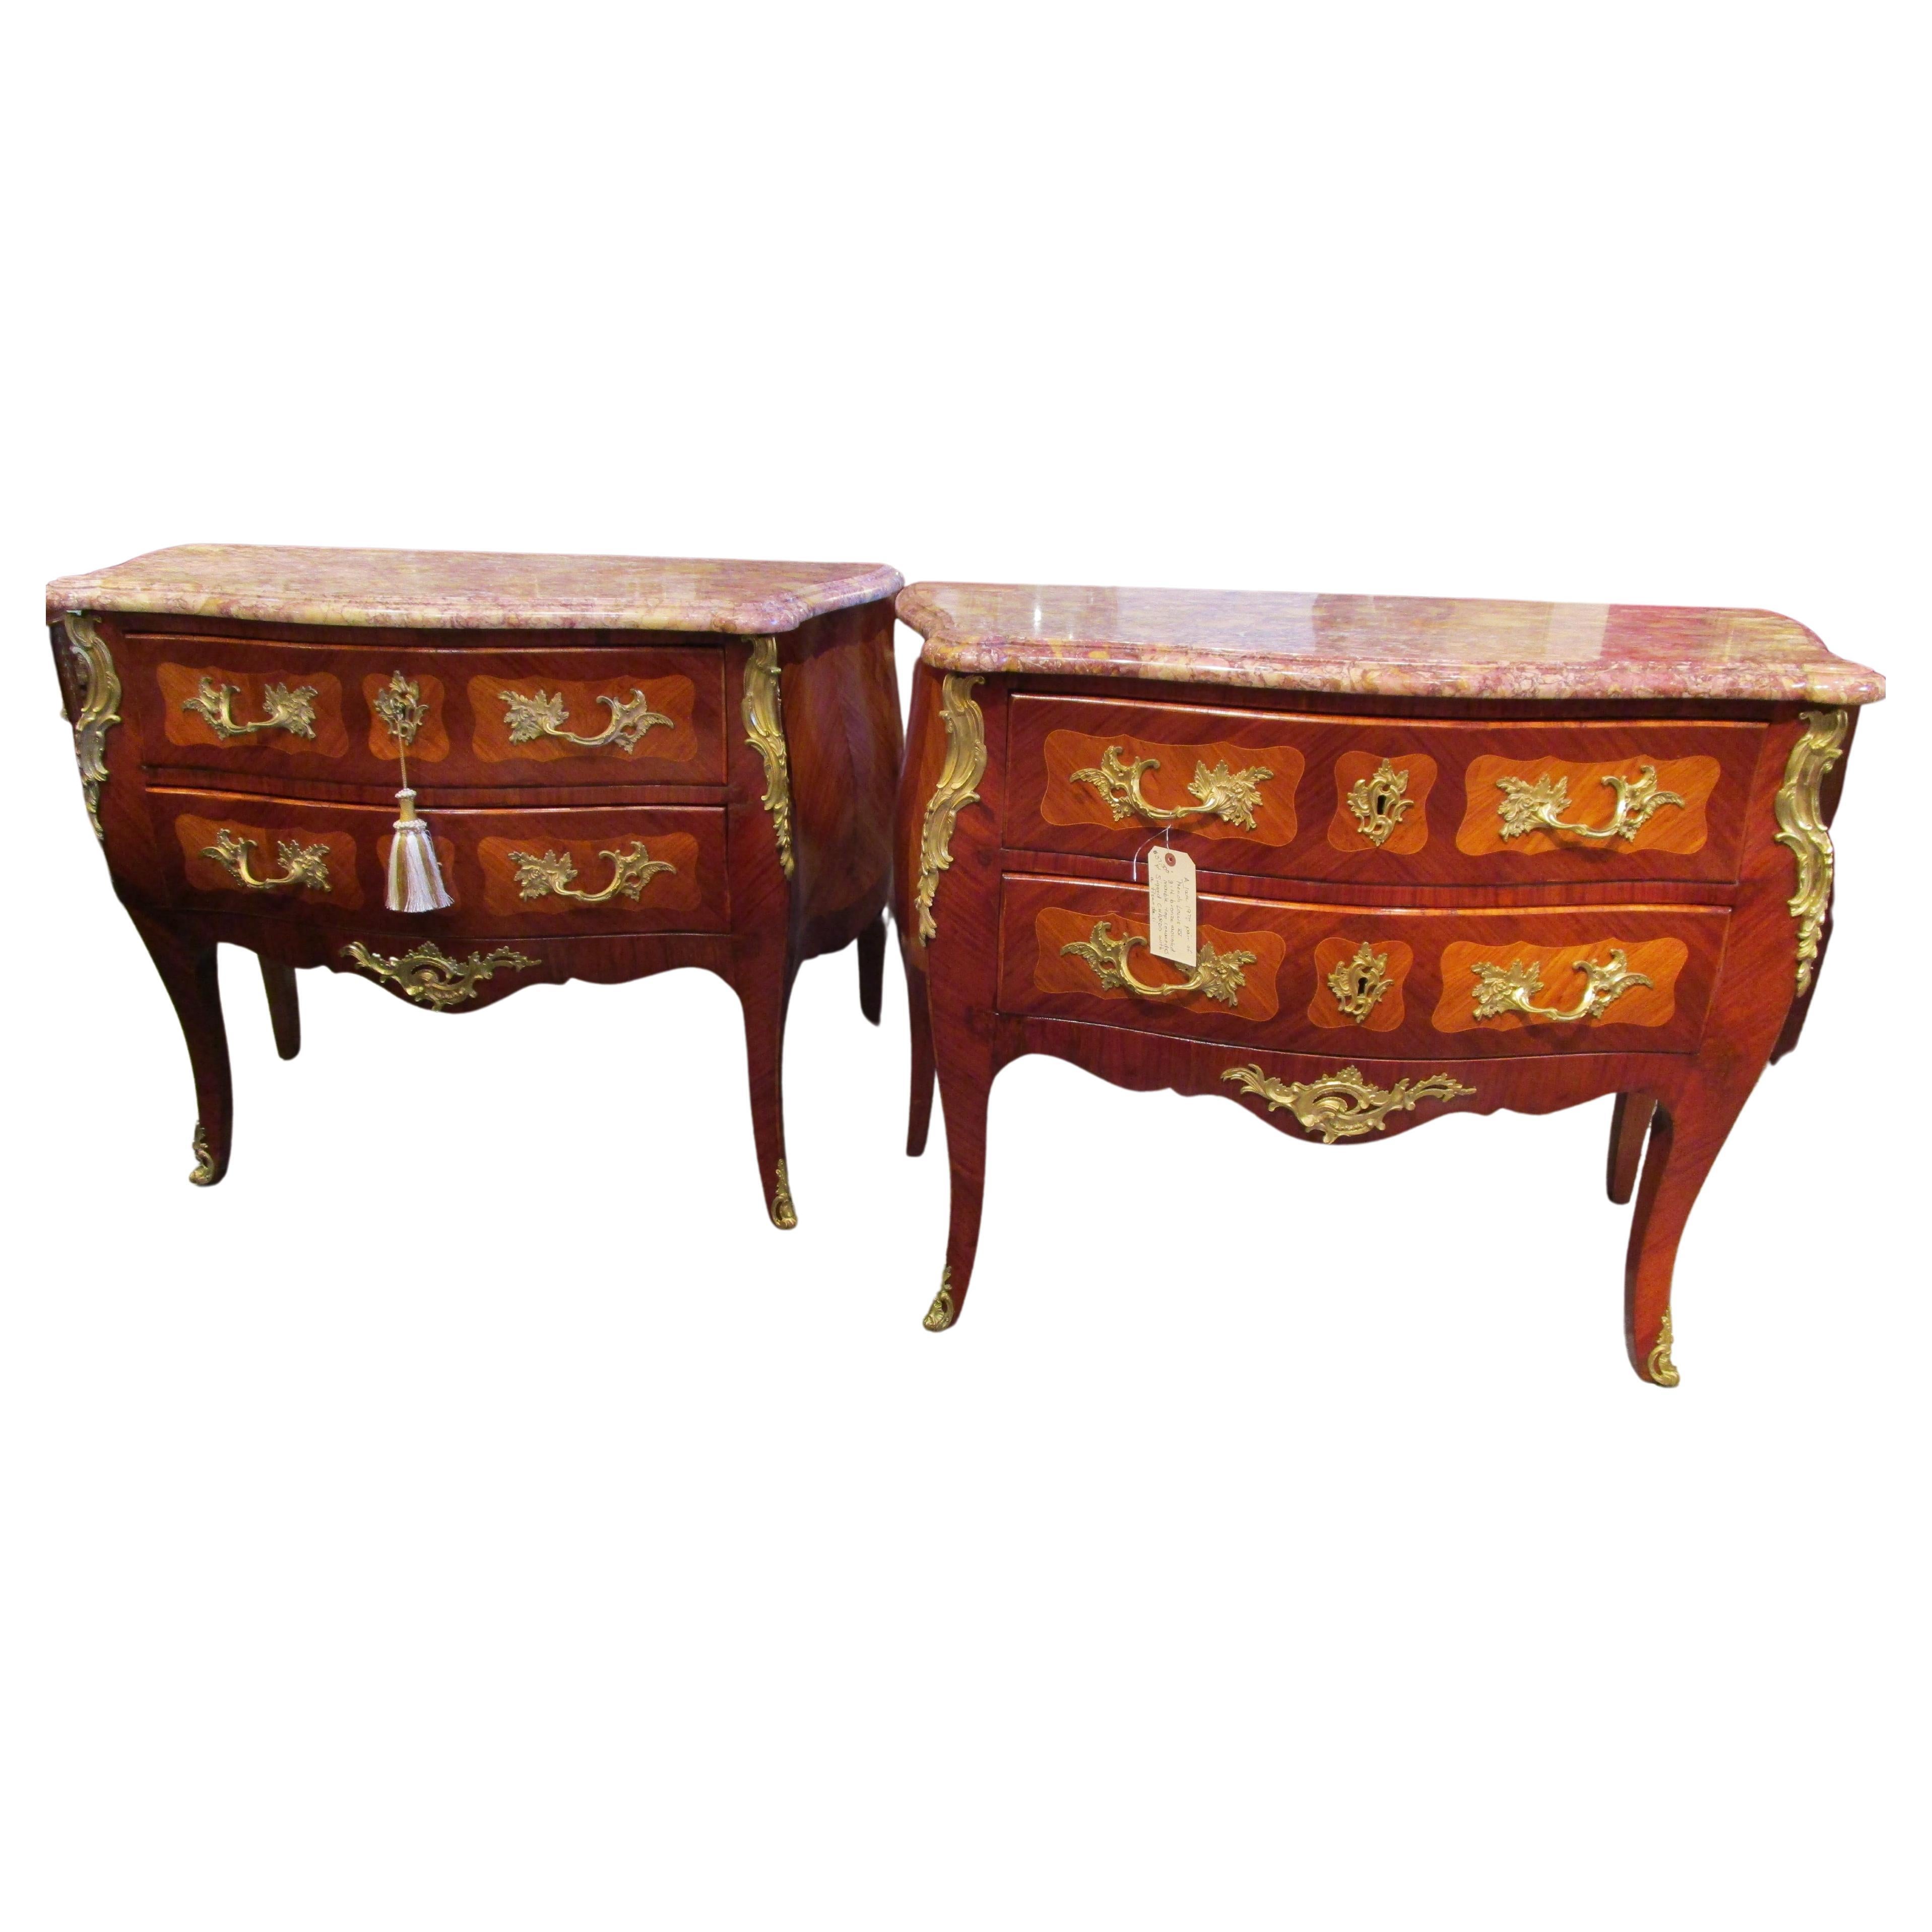 Fine Pair of Late 19th C French Louis XV Commodes Stamped by the Paris Maker